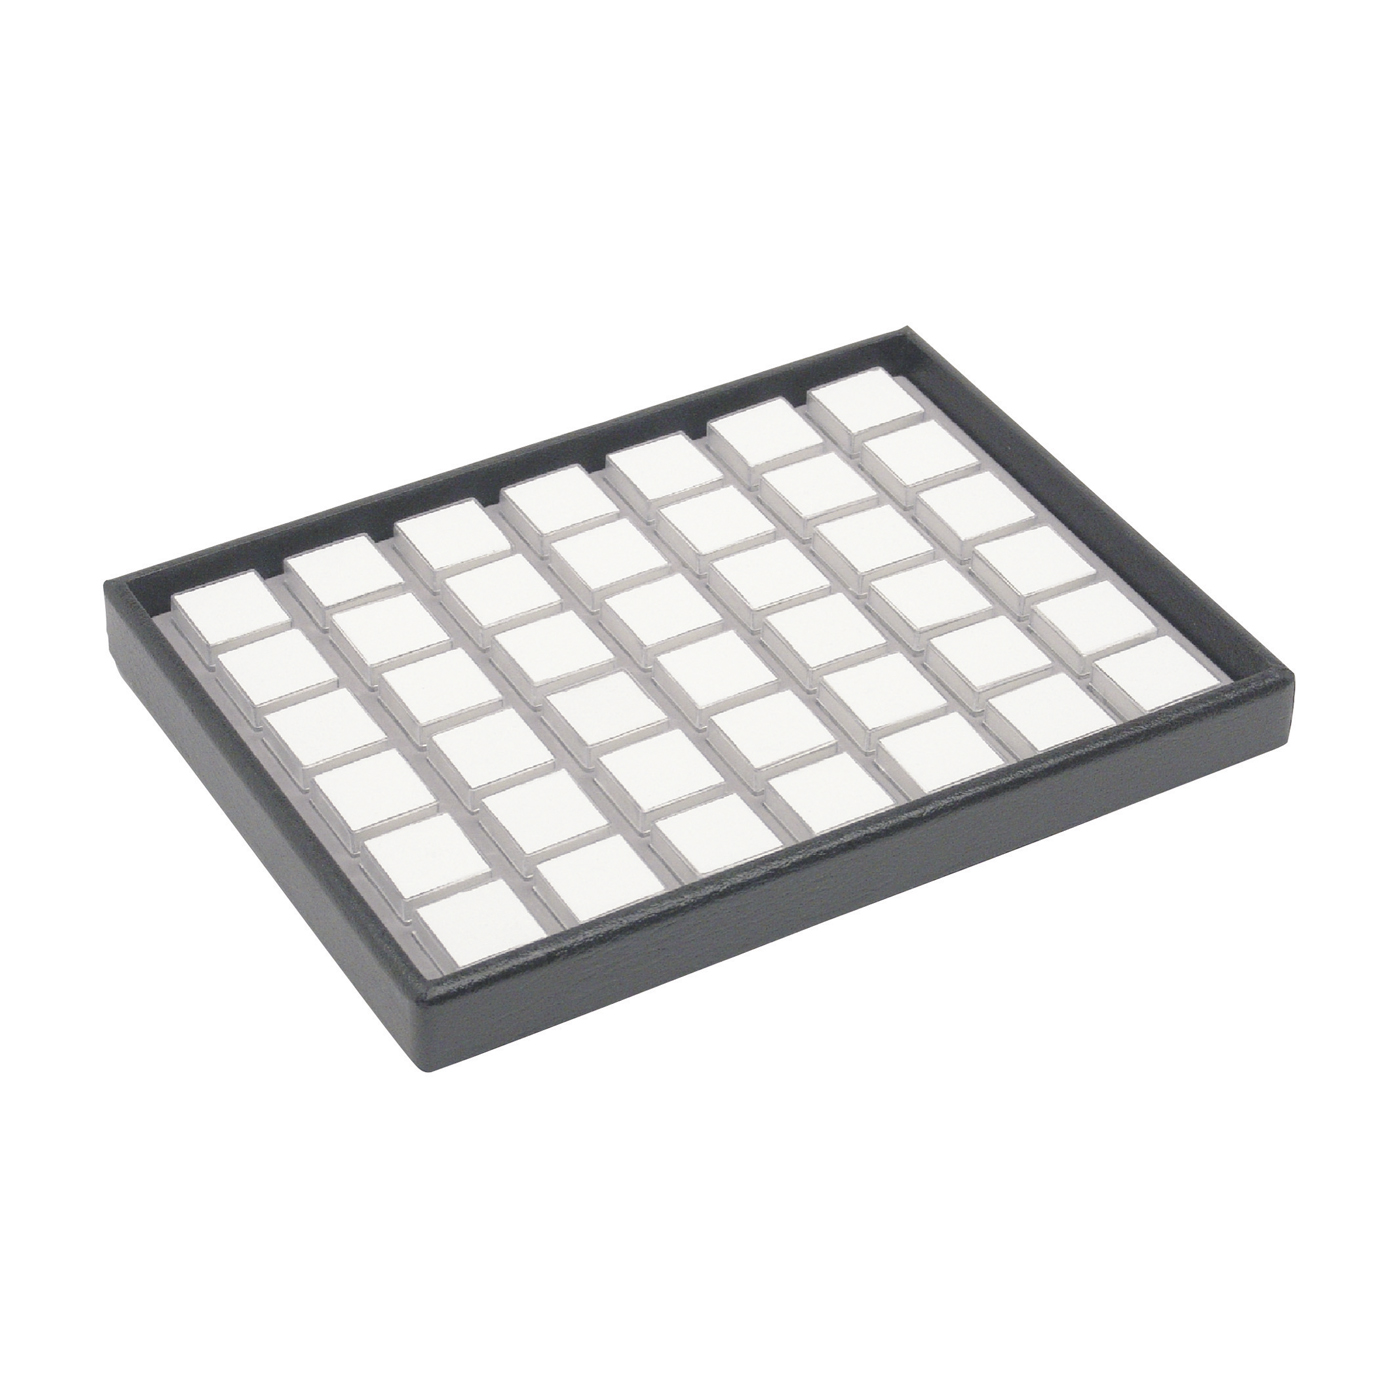 Stacking Tray with 42 Plastic Cans, Angular,280 x 210 x 25mm - 1 piece